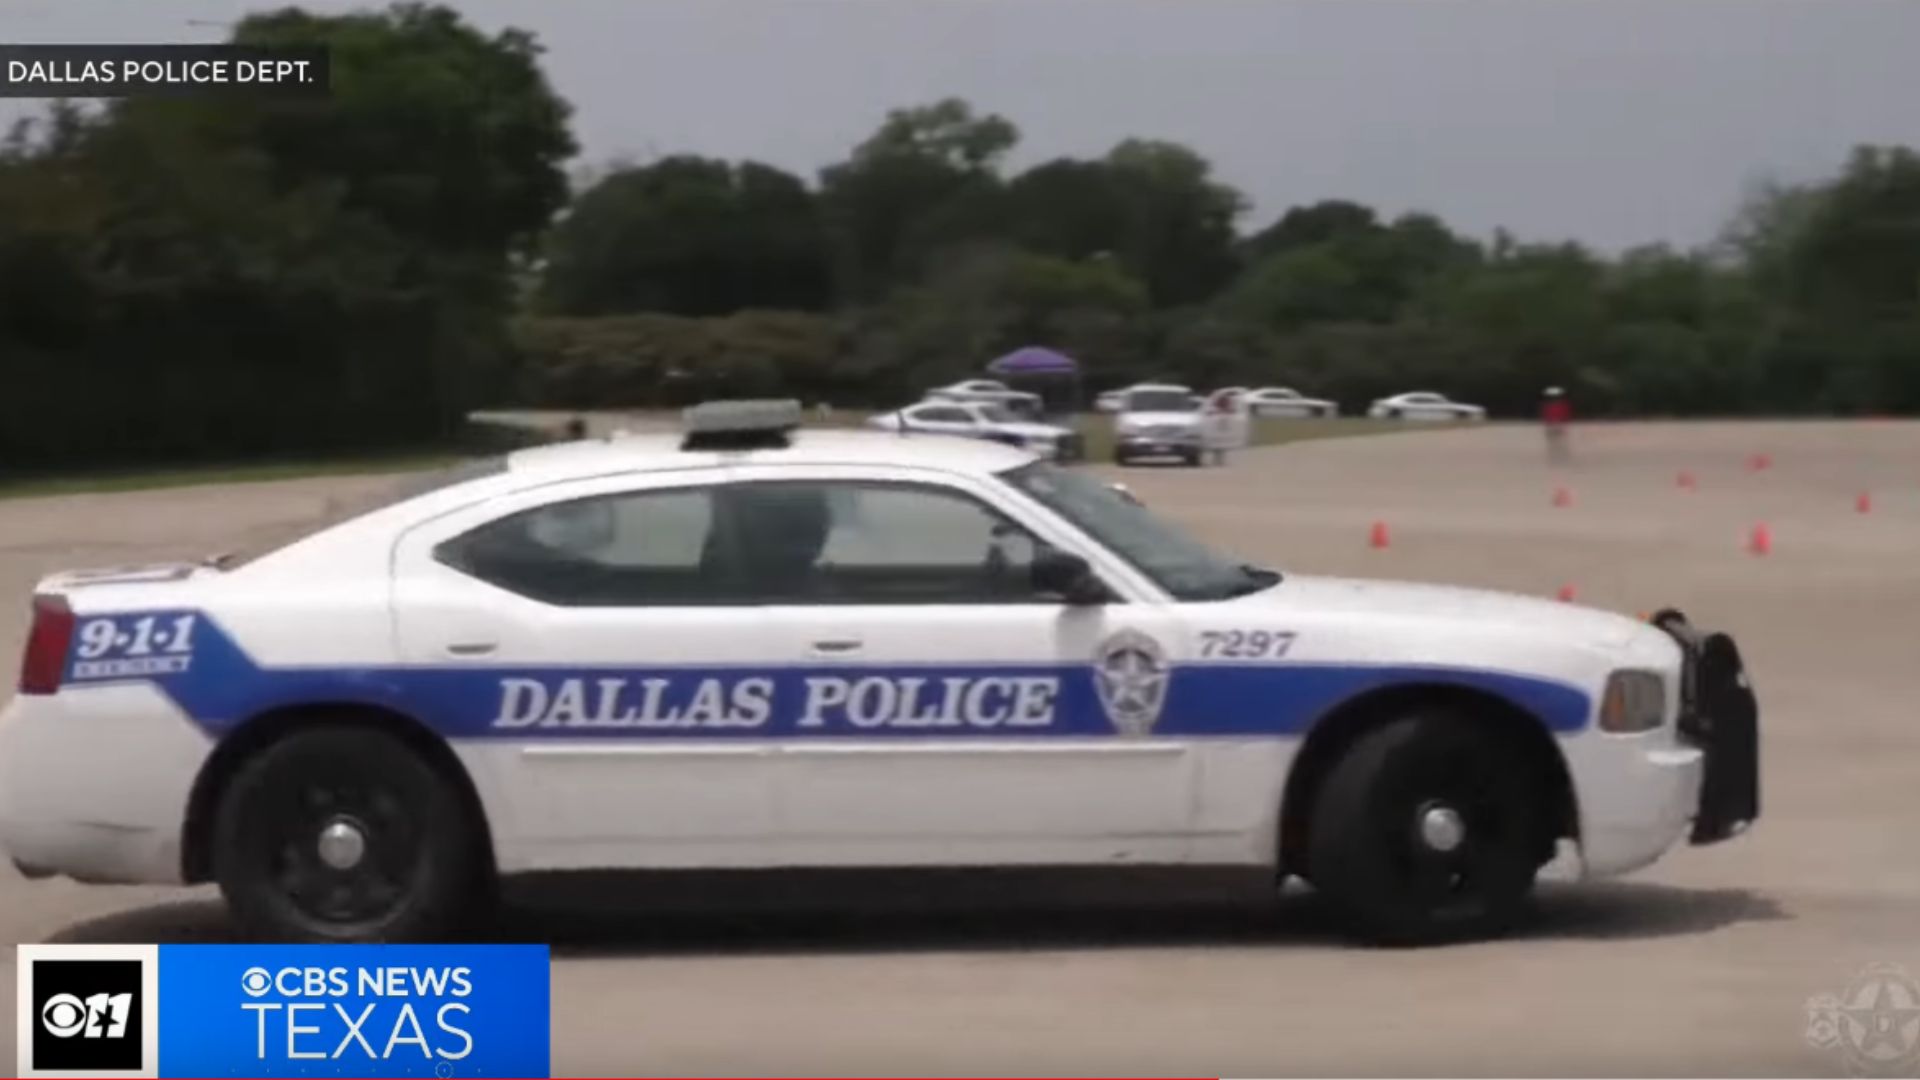 Report Claims Texas Police Don’t Have Proper Pursuit Training